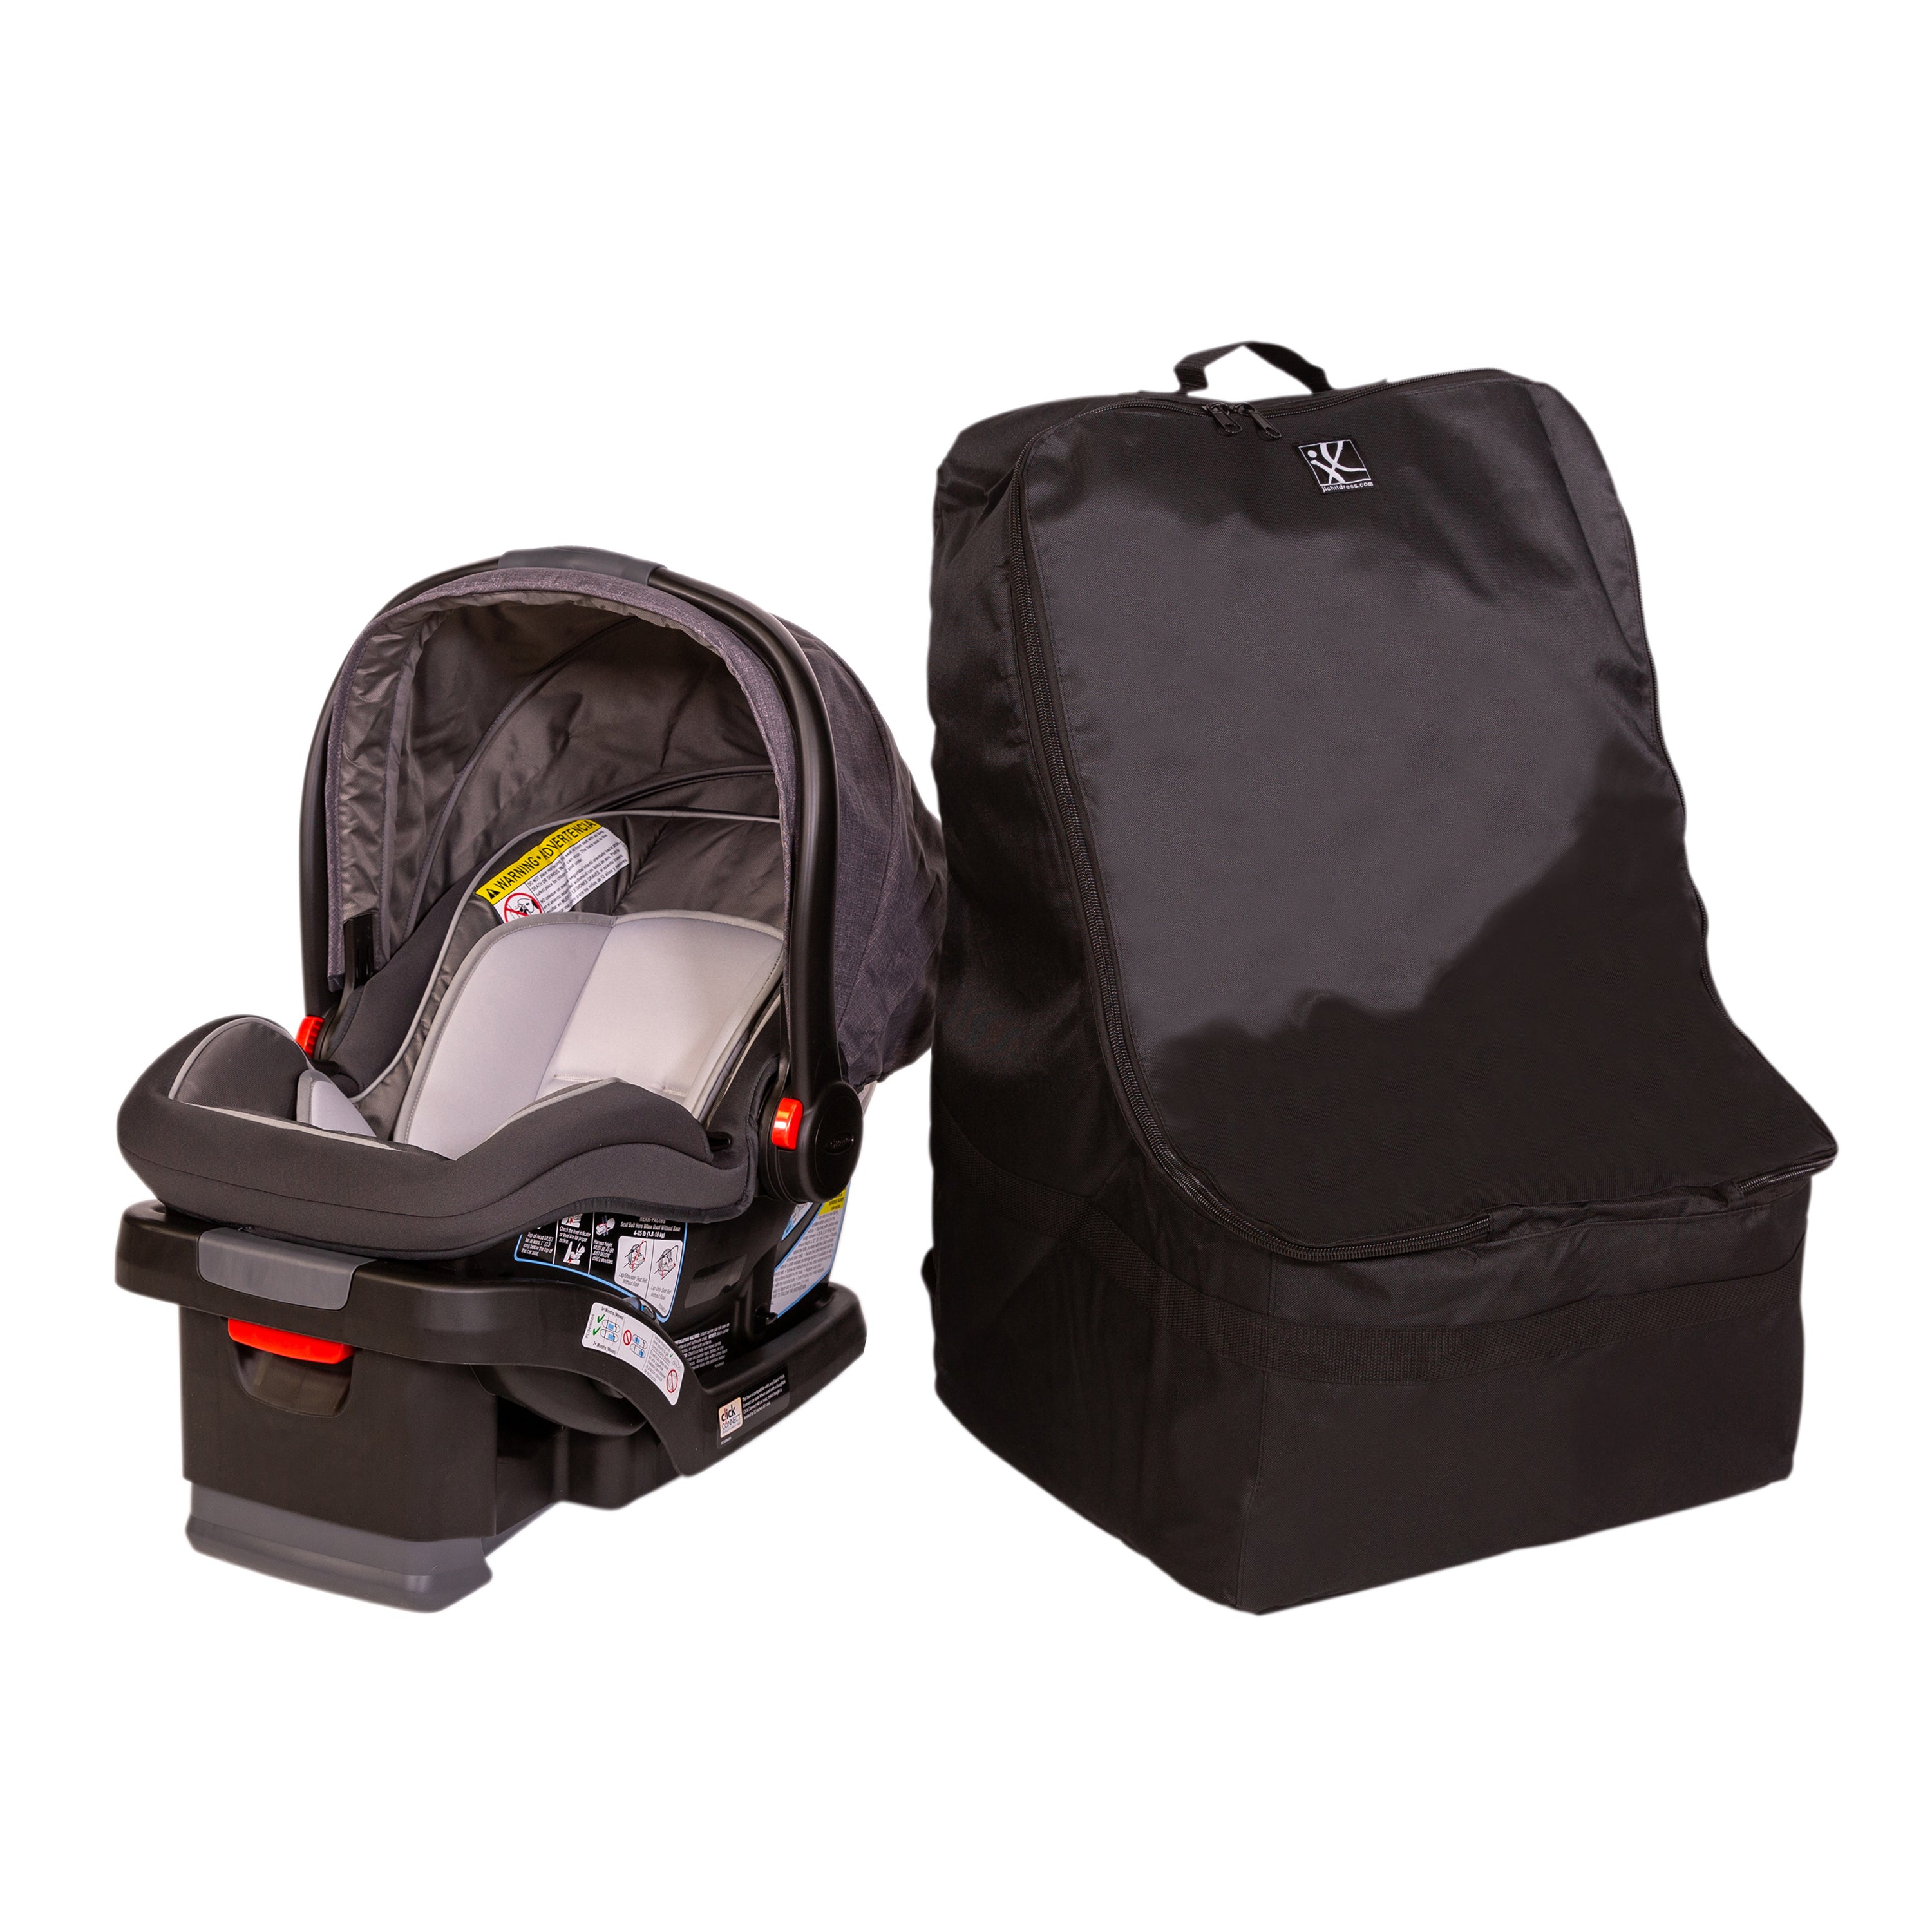 J.L. Childress Deluxe Gate Check Bag for Single & Double Strollers